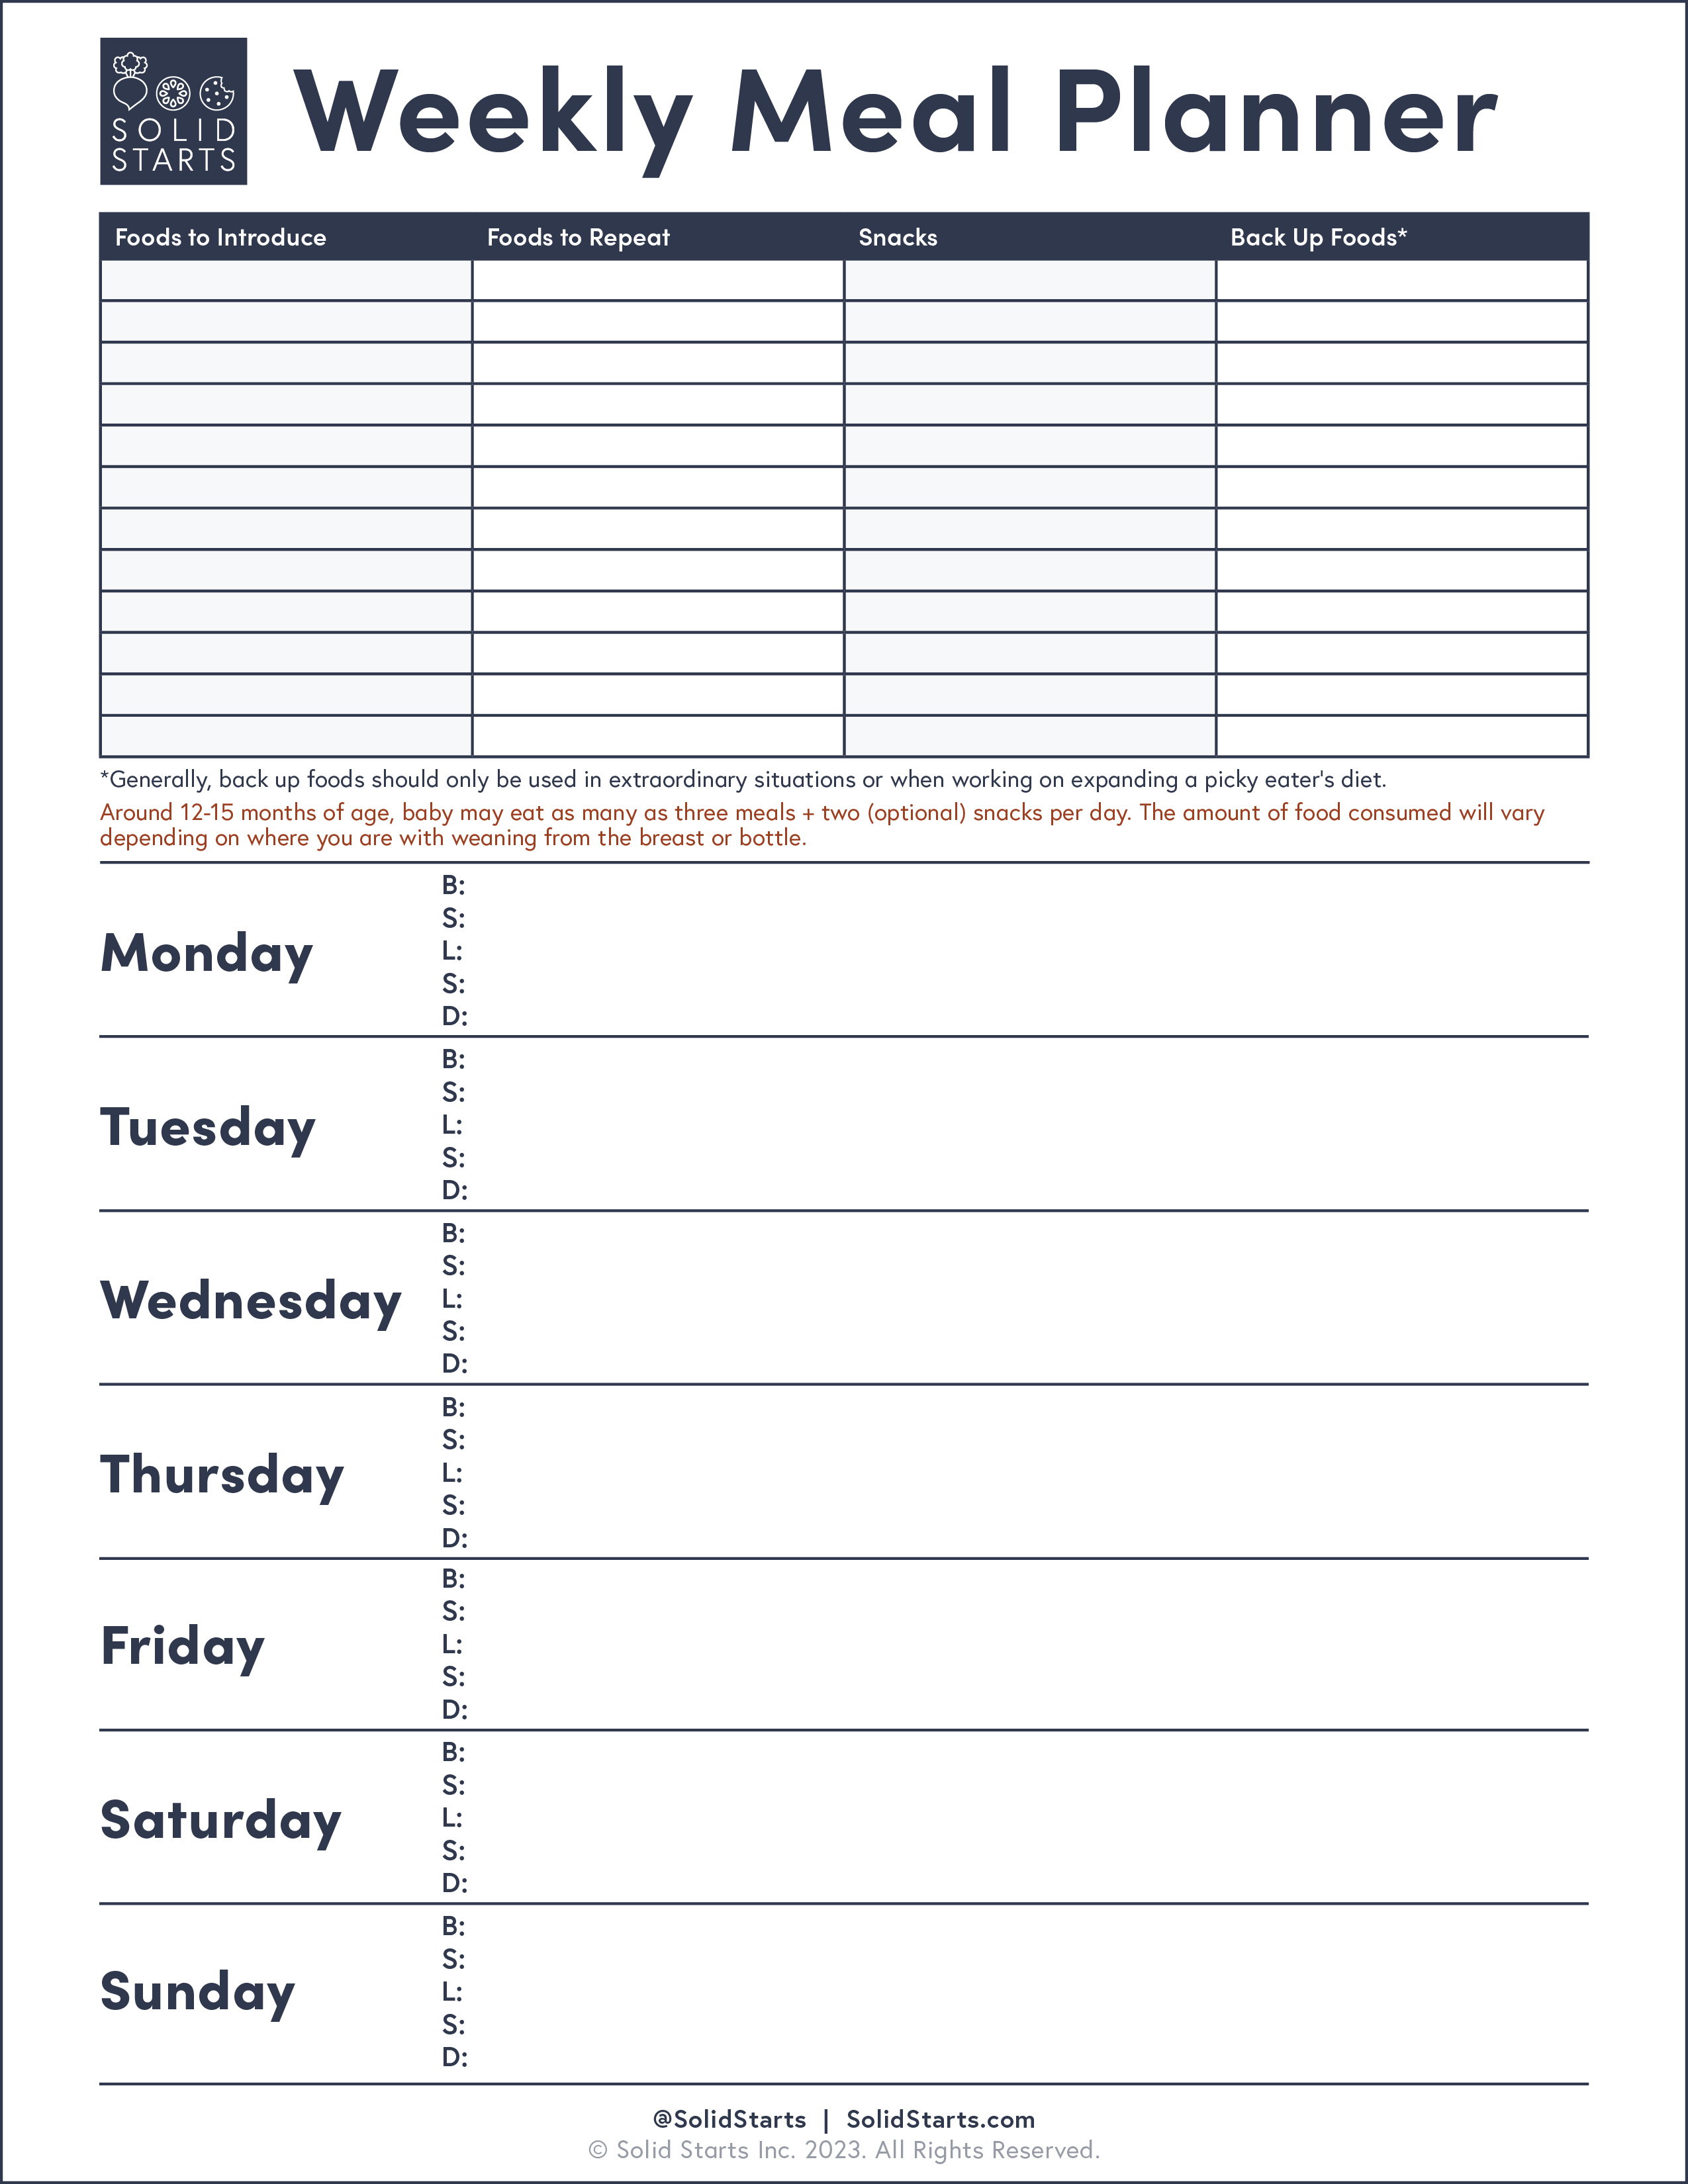 Weekly Meal Planner Template - Solid Starts